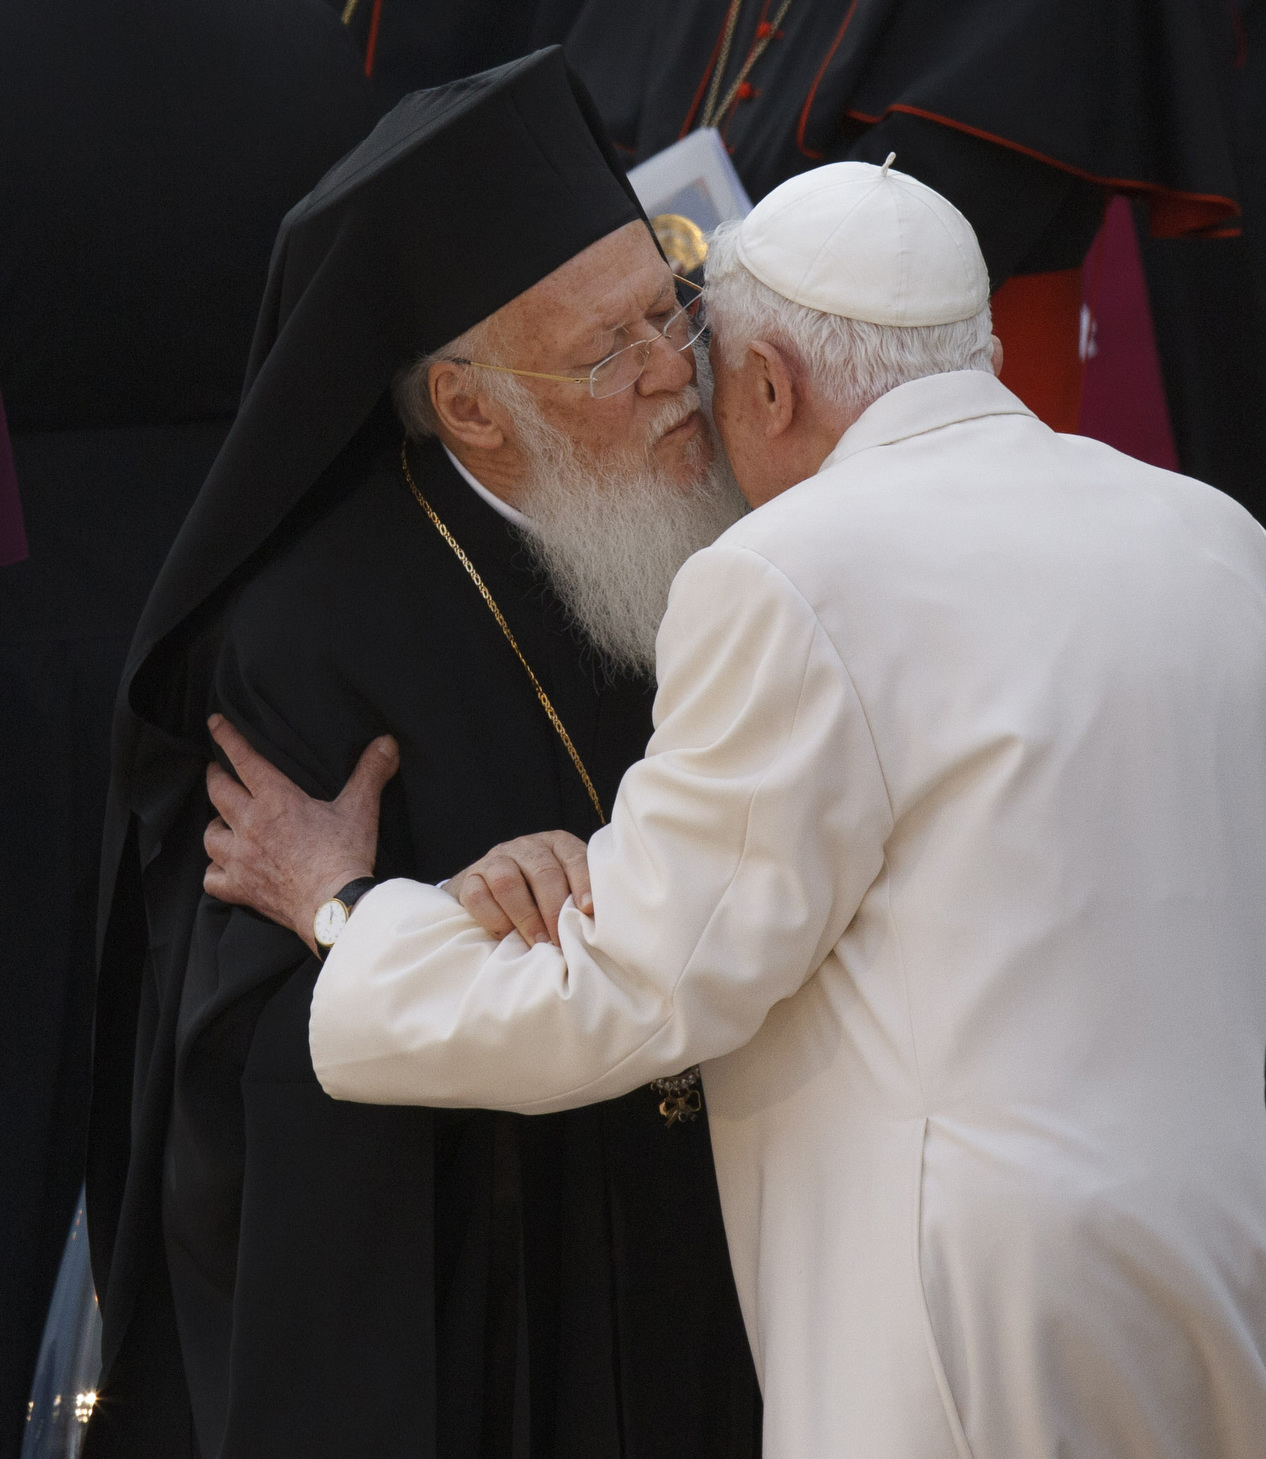 Ecumenical Patriarch Bartholomew of Constantinople and Pope Benedict XVI embrace during a 2011 interfaith meeting for peace outside the Basilica of St. Francis in Assisi, Italy. (CNS photo/Paul Haring)